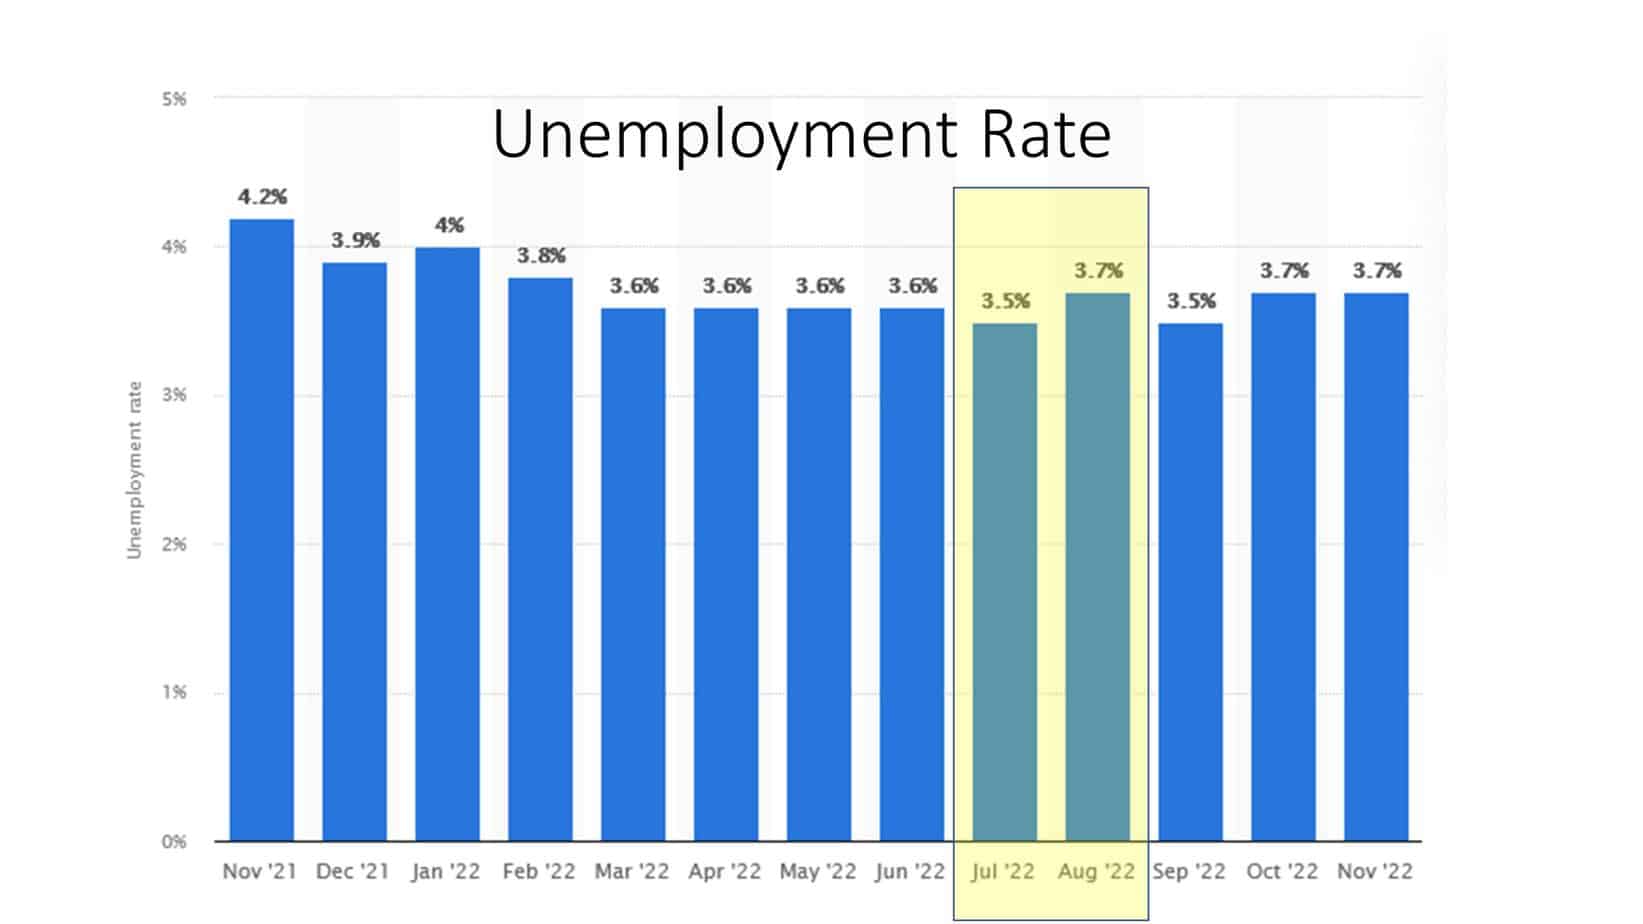 Unemployment rate in US scaled